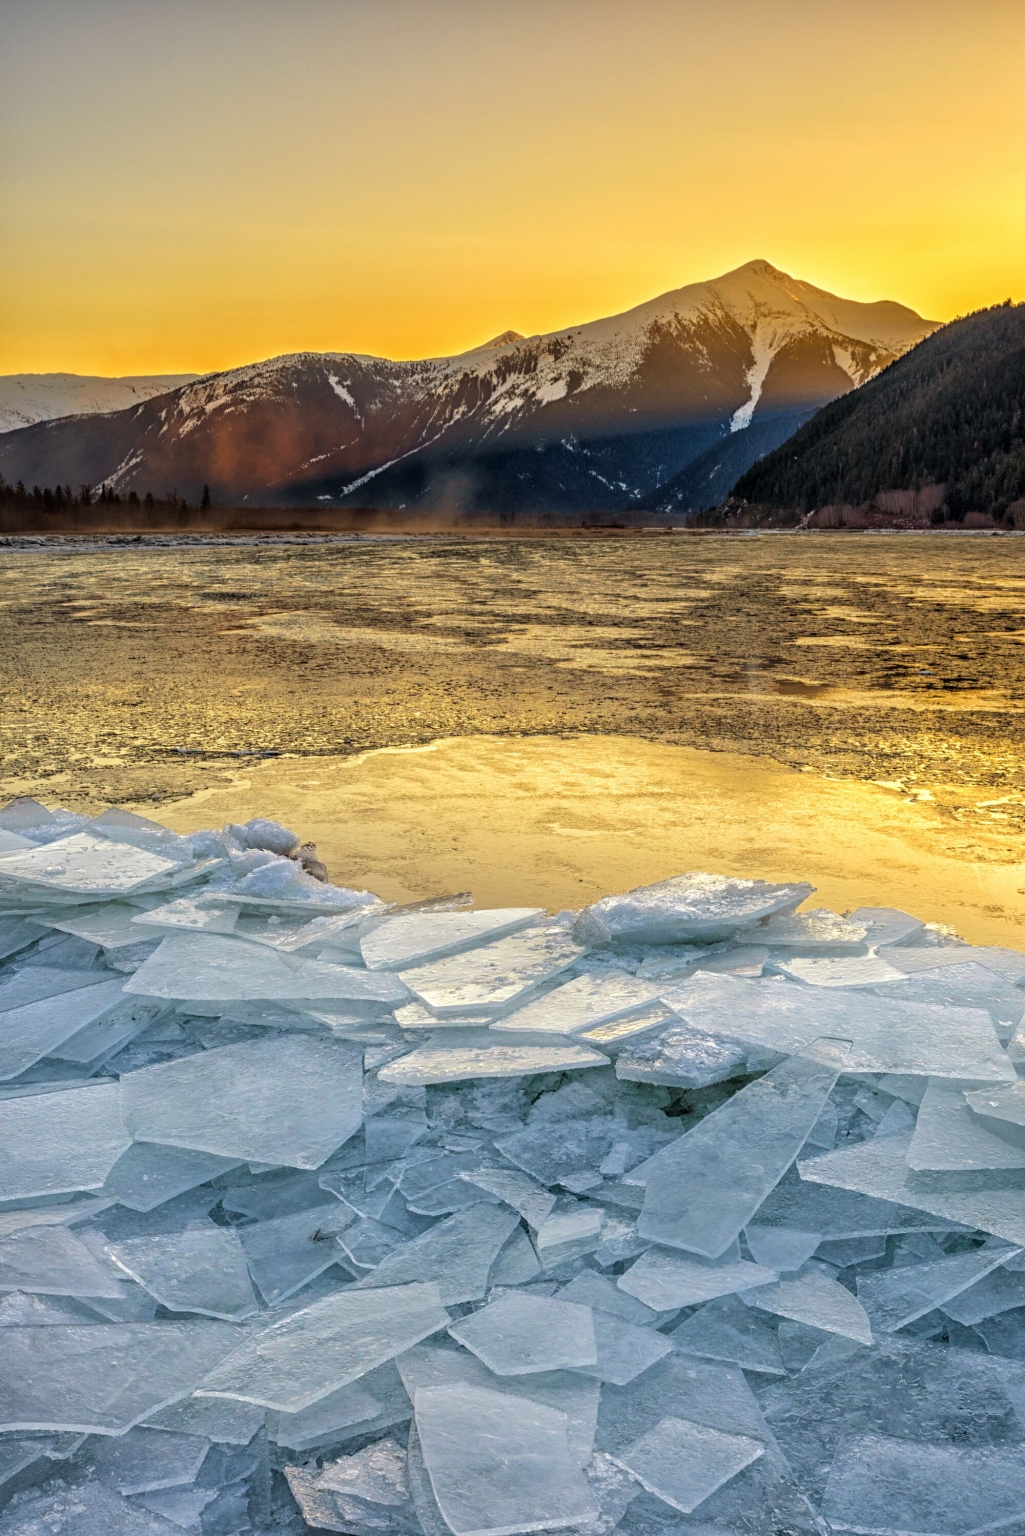 Thin squares of ice sit piled up on the surface of a lake at sunrise, mountains in the background.